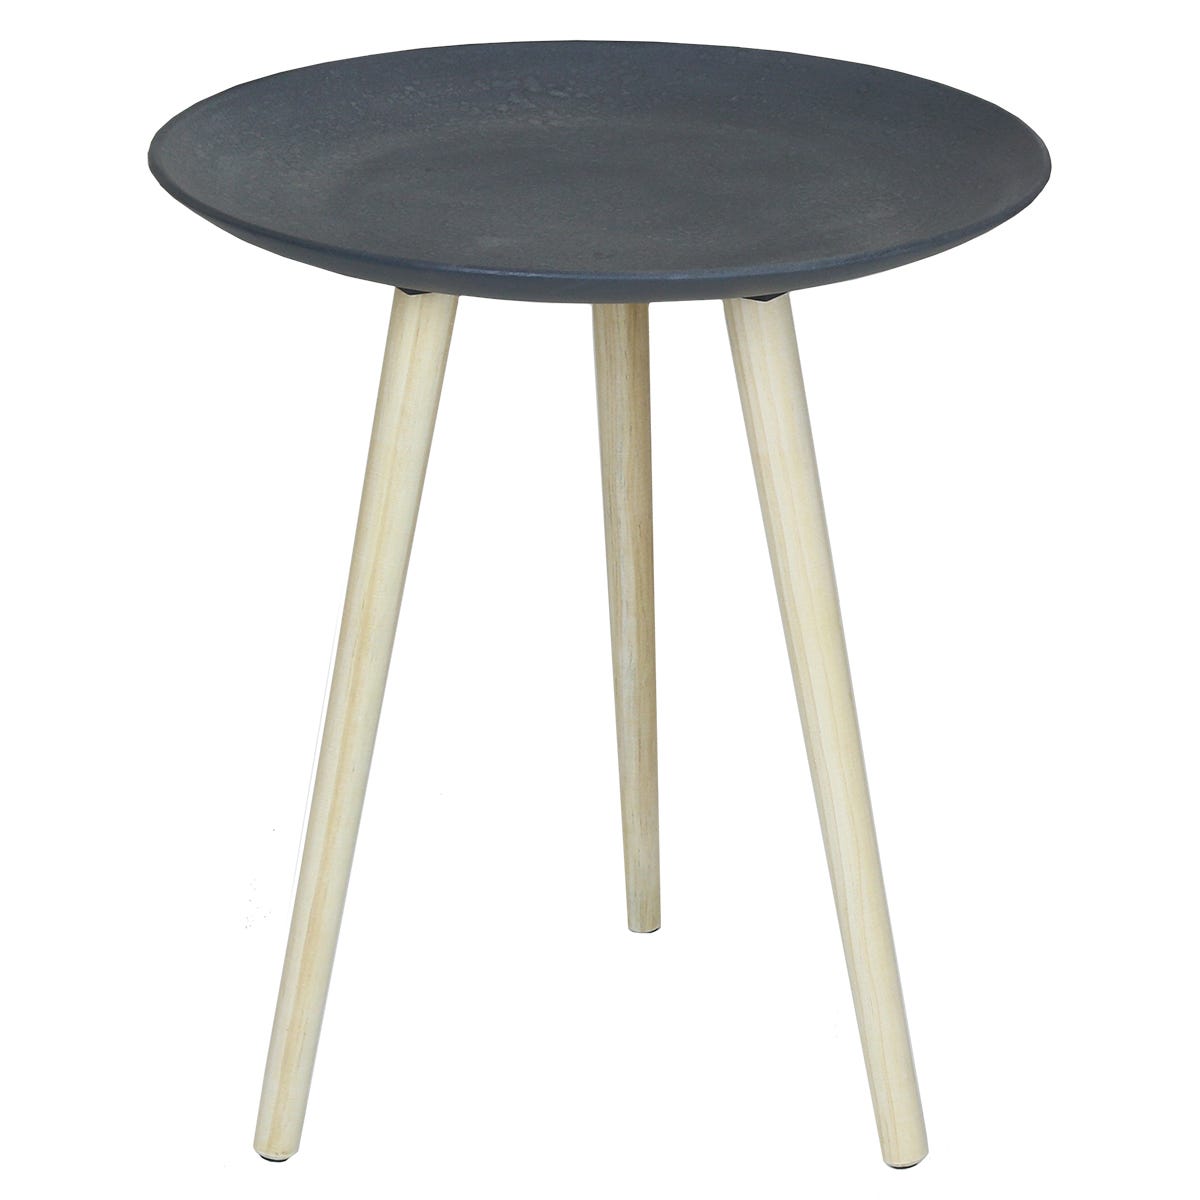 Charles Bentley Concrete Effect Side Table